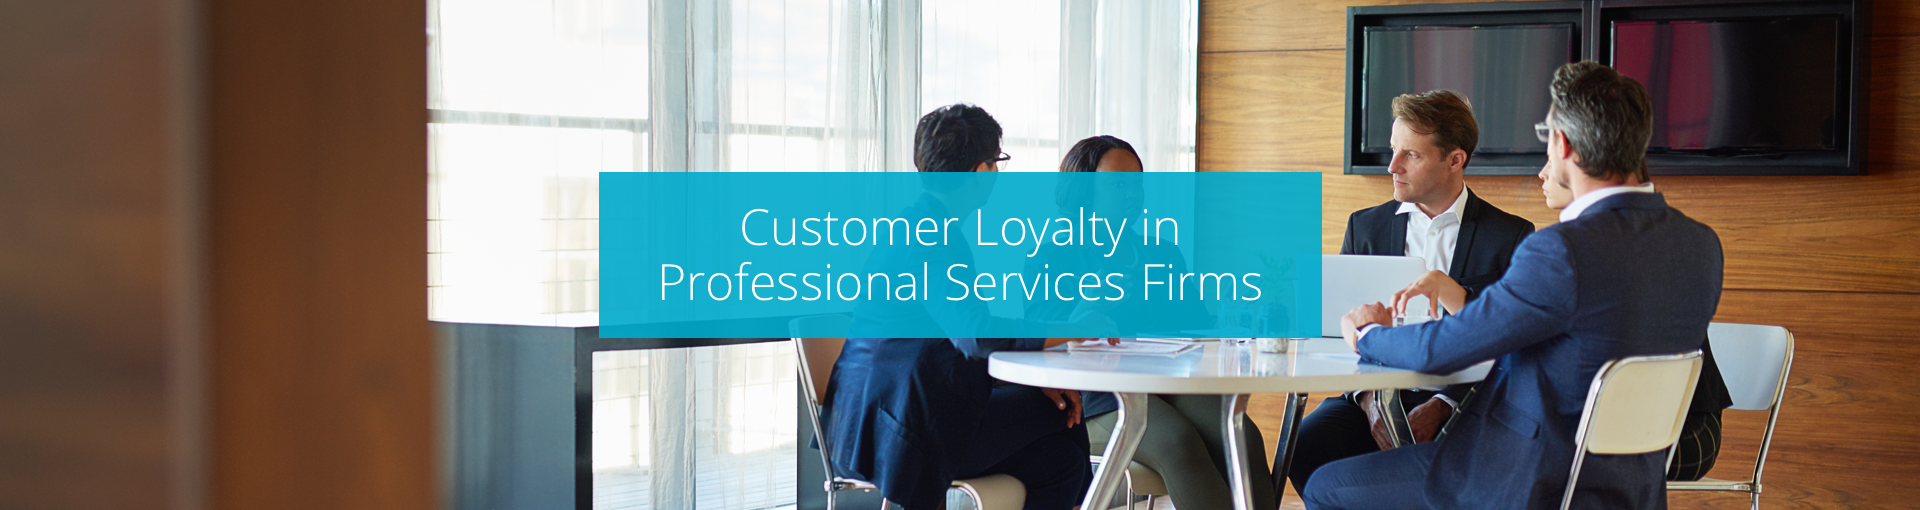 Customer Loyalty in Professional Services Firms Featured Image